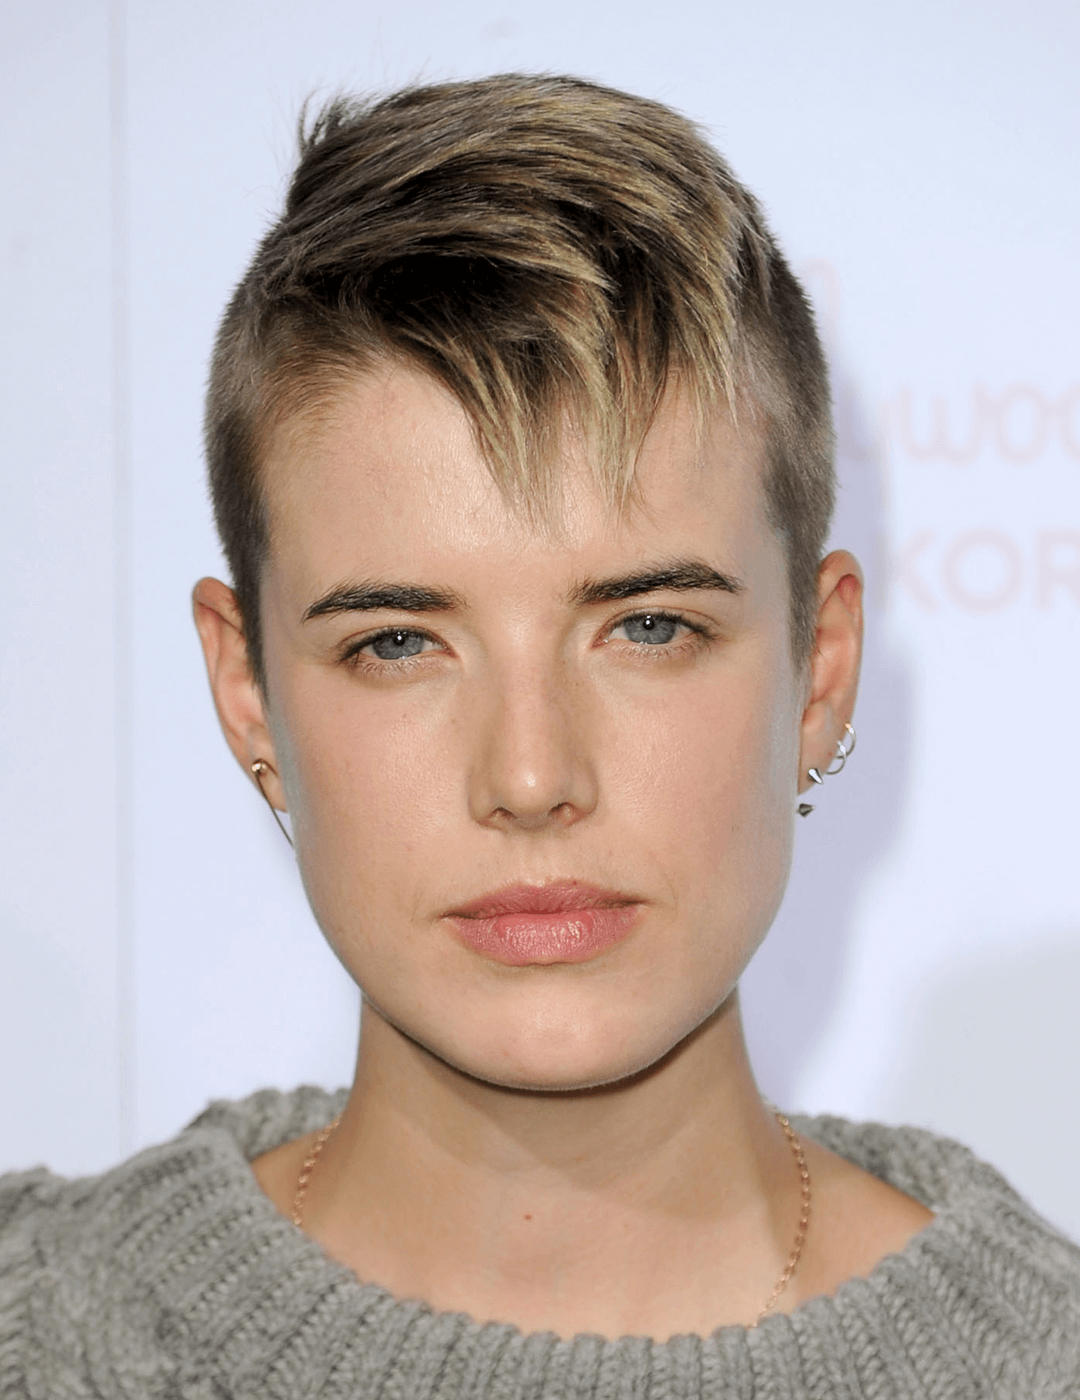 Model Agyness Deyn sporting on a grey sweatshirt, no-makeup makeup look, and a mohawk hairstyle